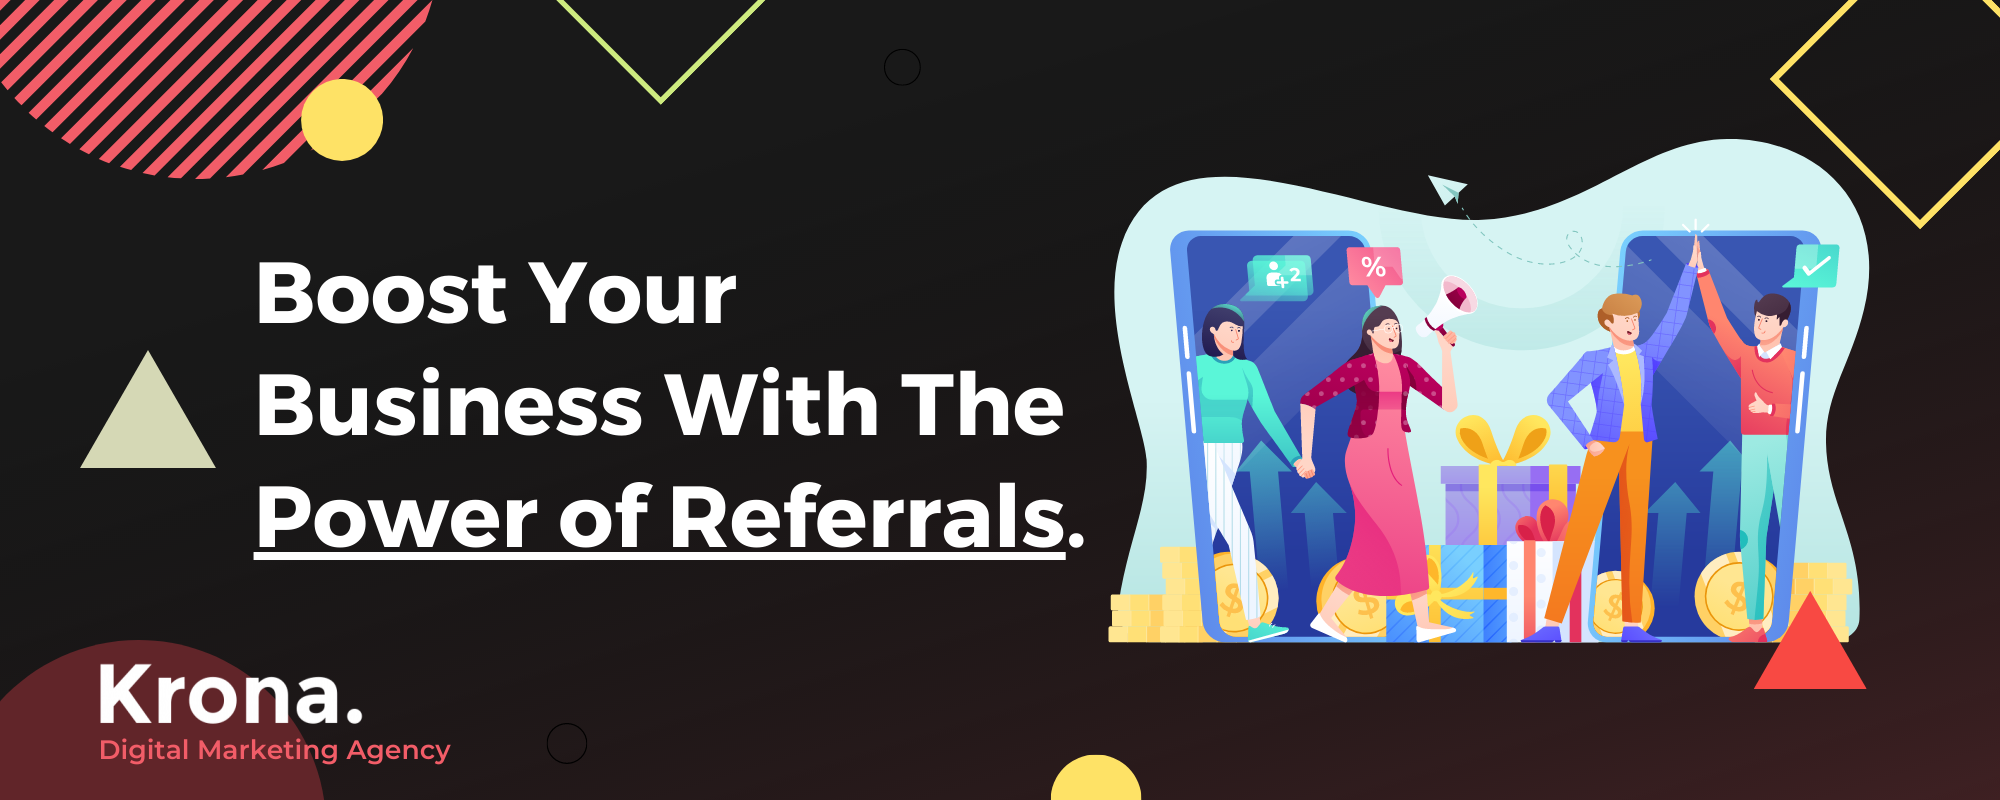 Boost Your Business With The Power of Referrals